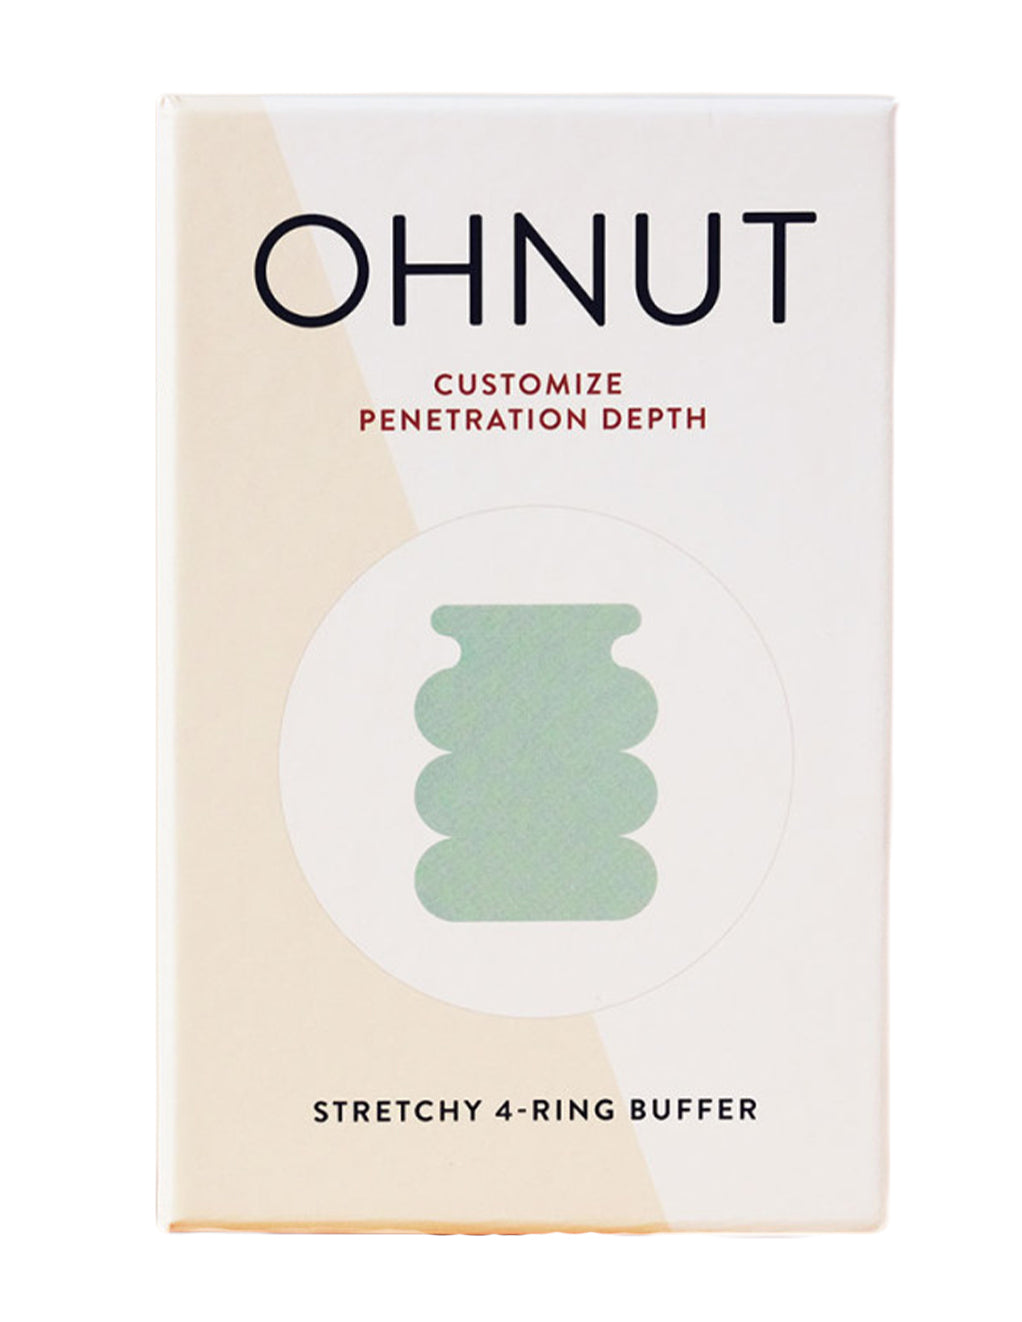 Ohnut Stretchy 4-Ring Buffer- Package